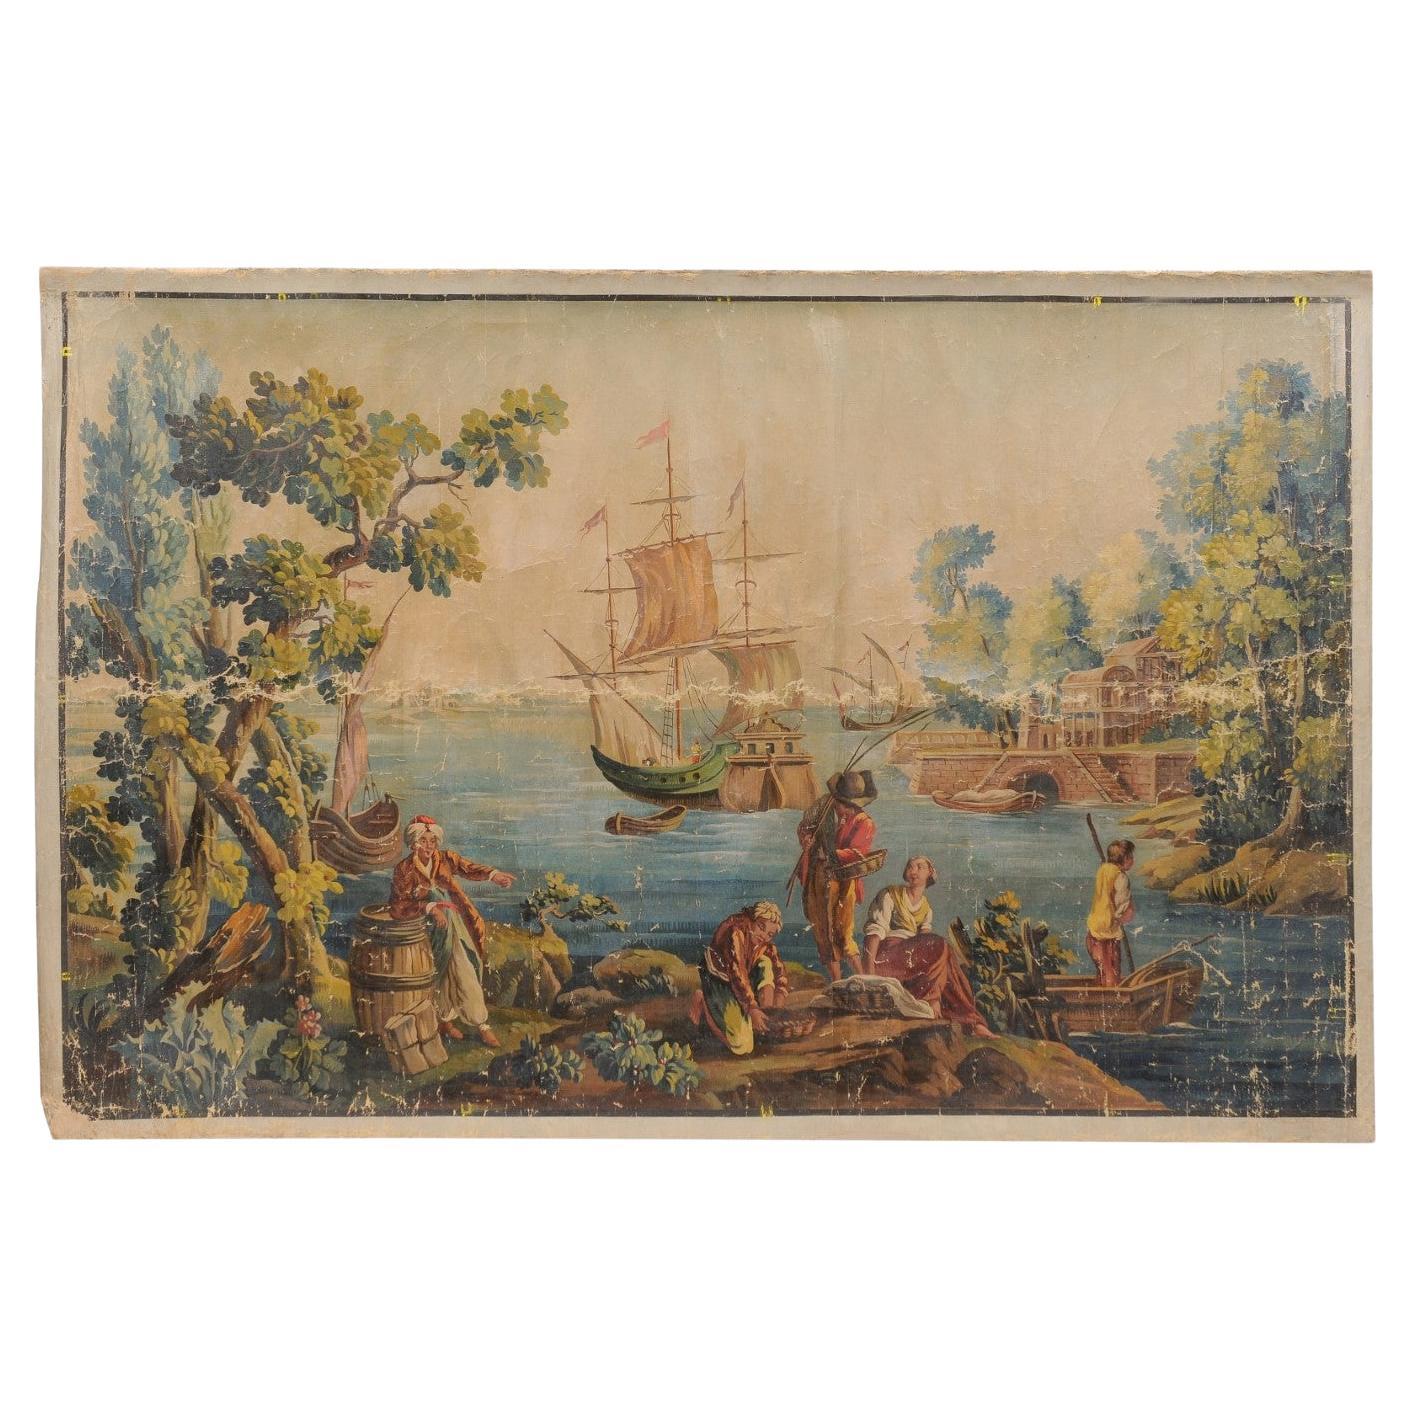 Large Early 19th Century French Oil on Linen Painted Panel with Waterway Scene